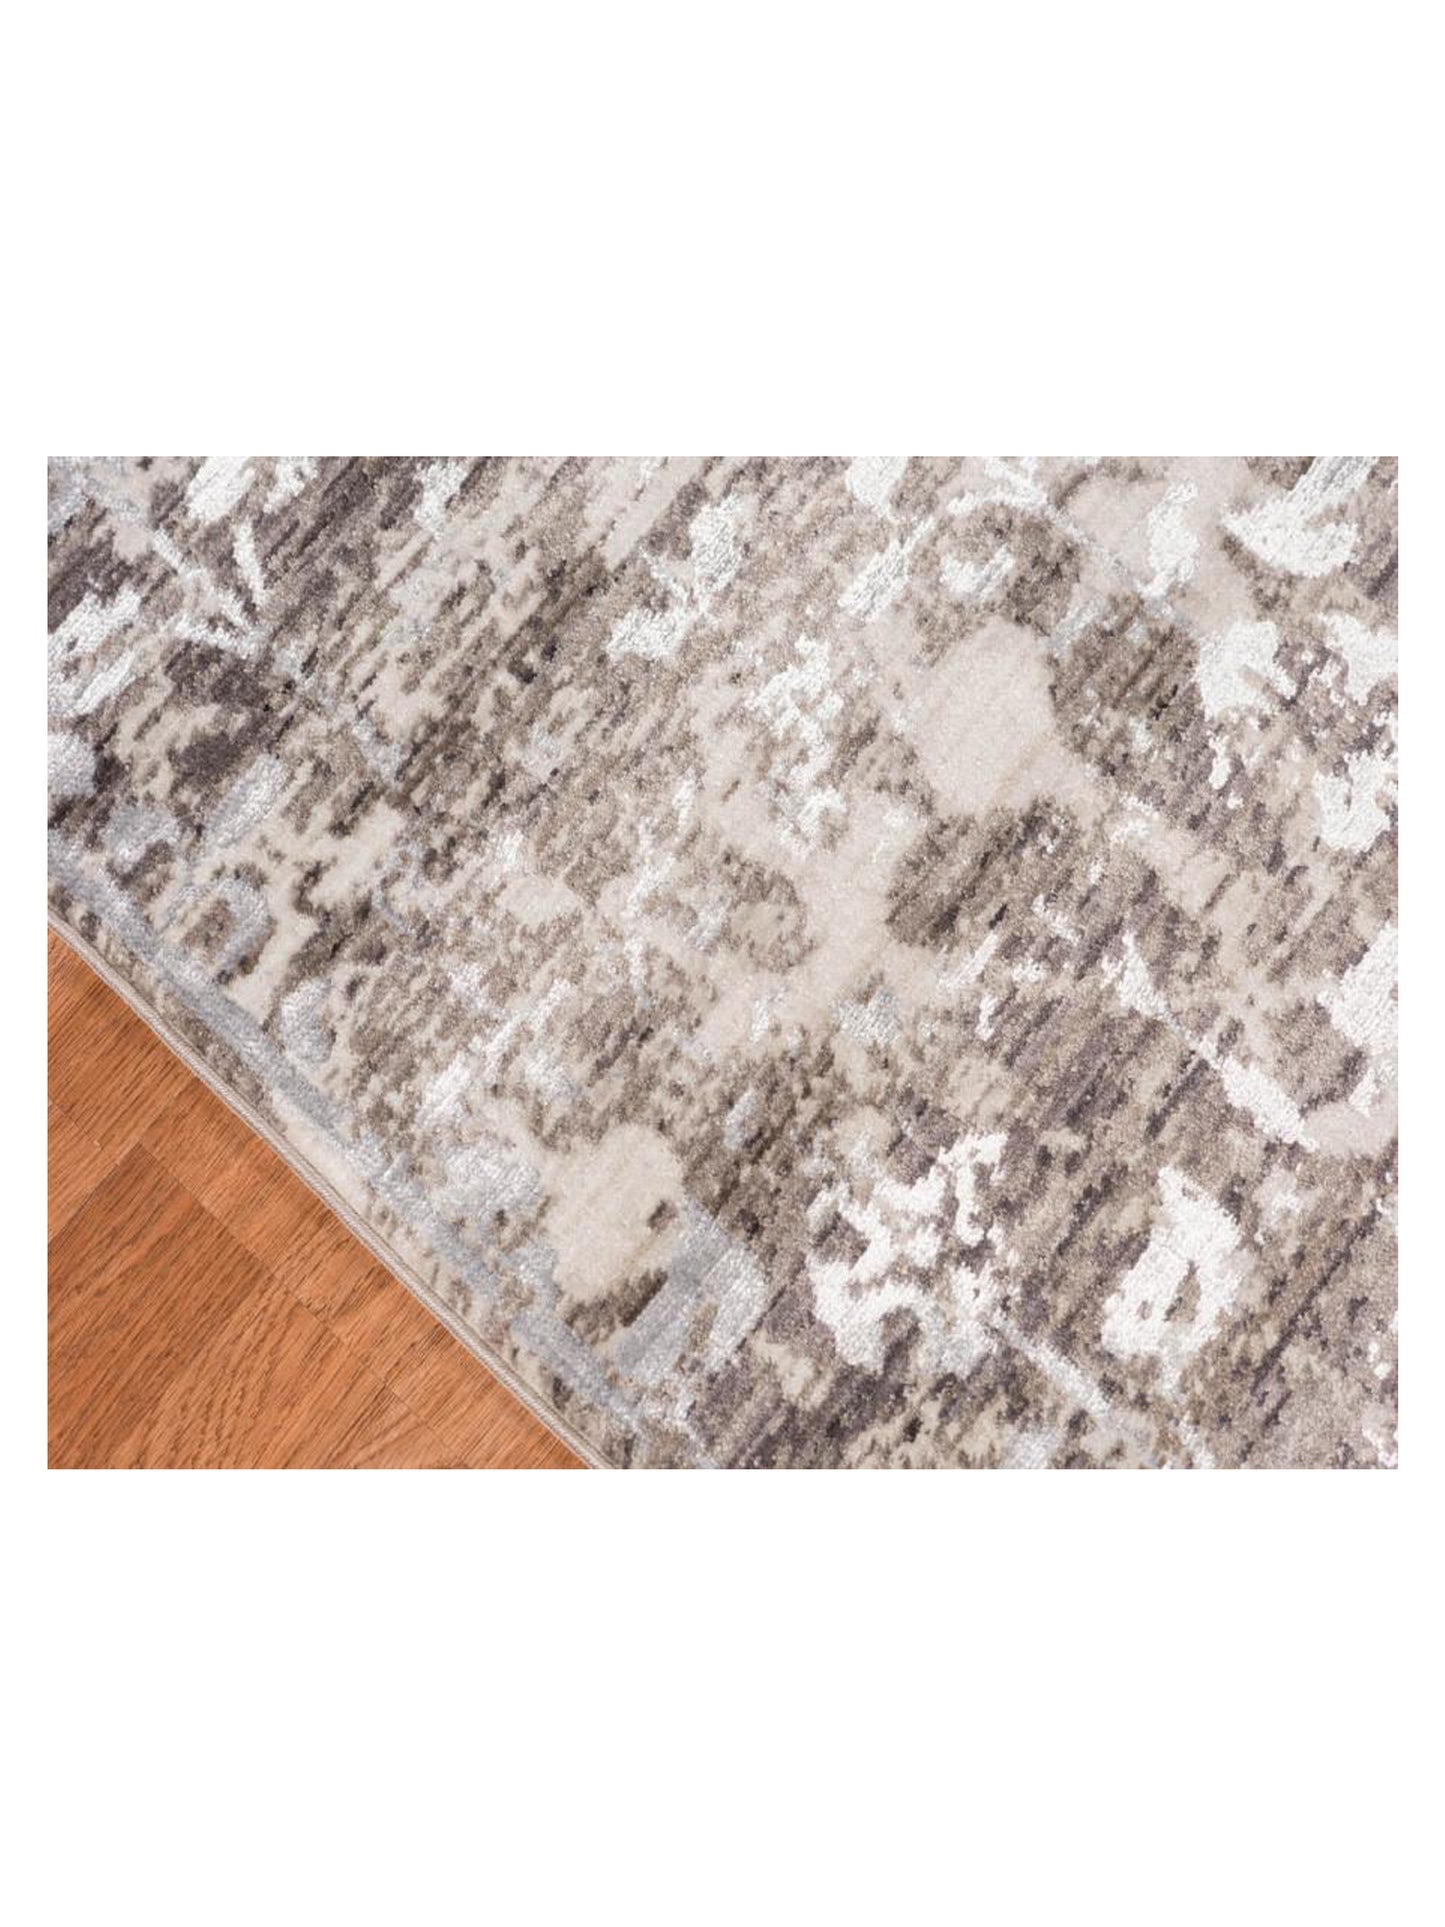 Limited Rosy RO-527 Silver  Transitional Machinemade Rug